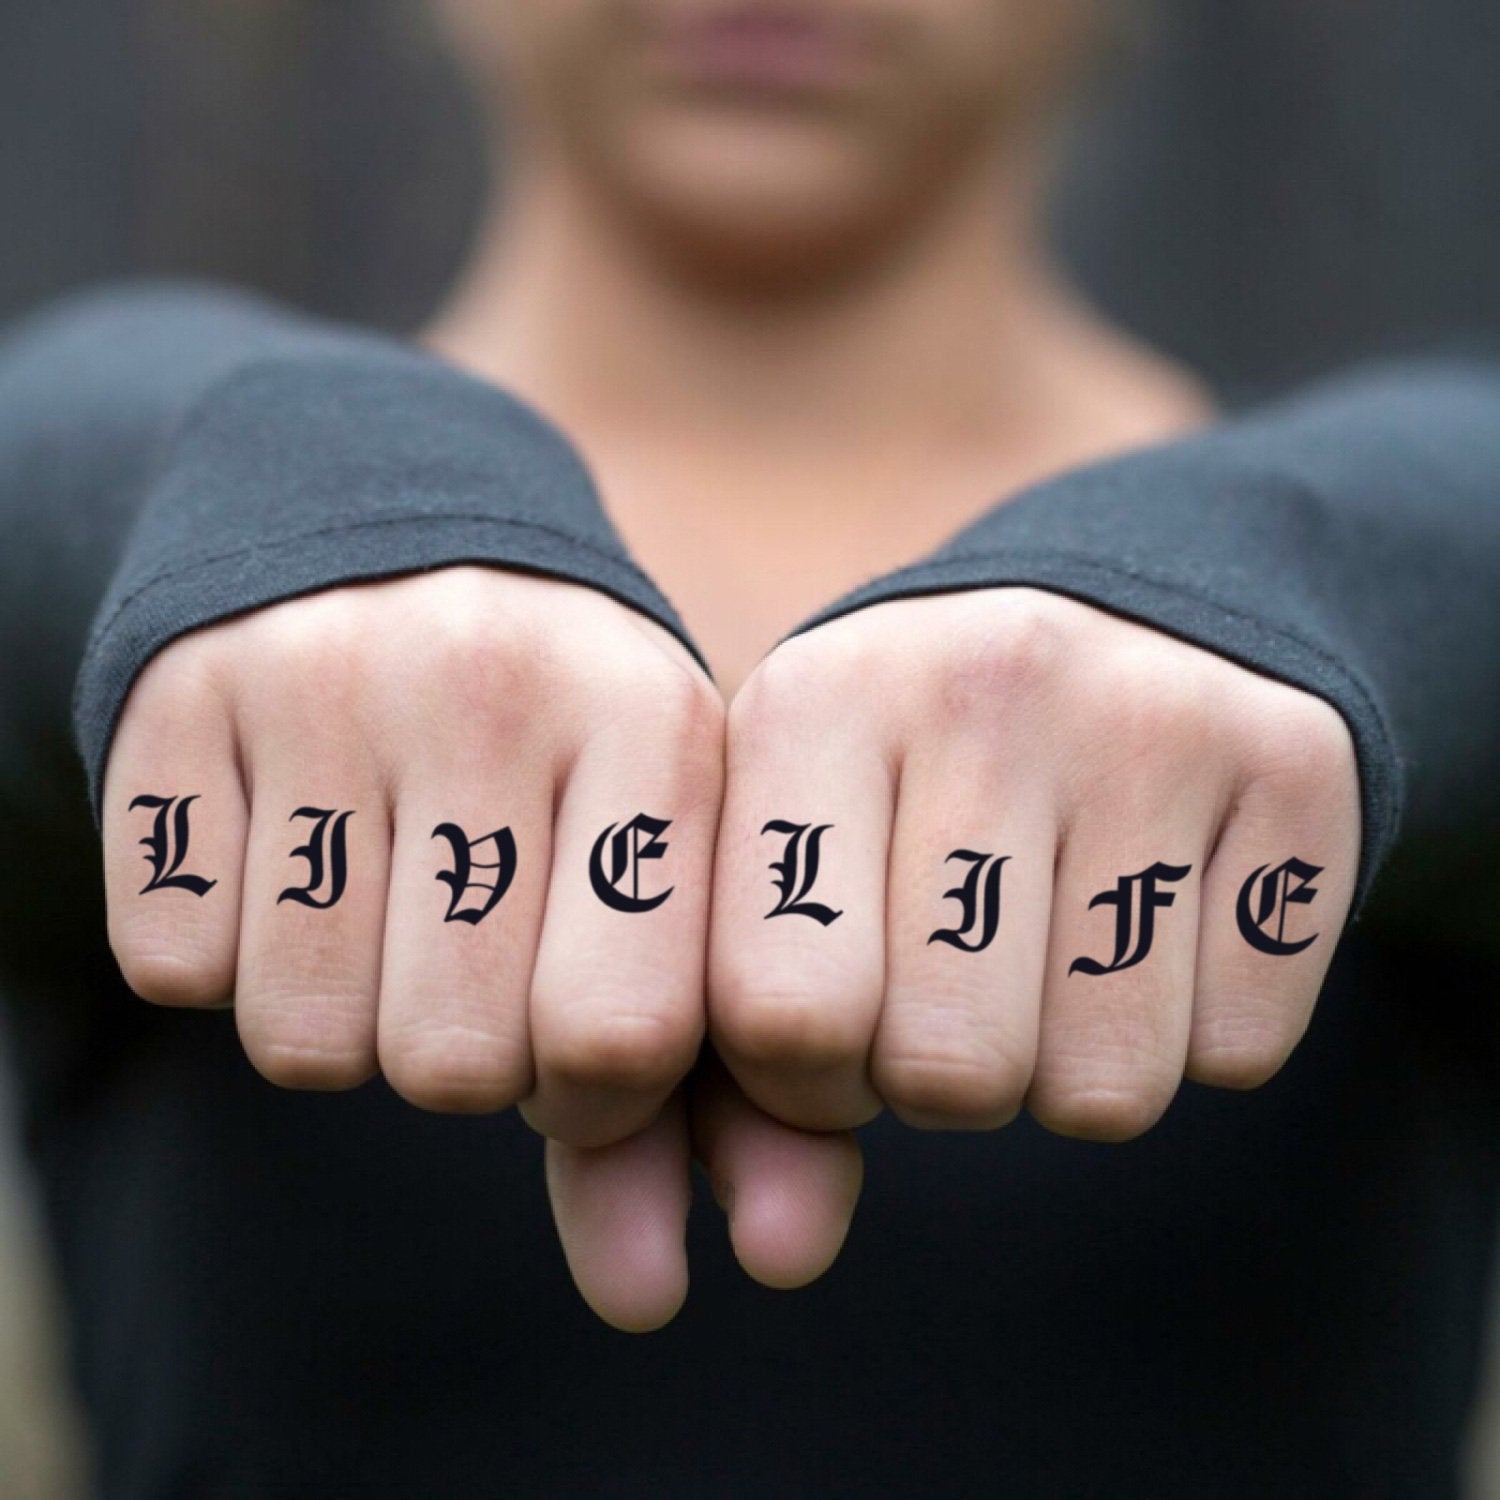 Hi Im looking to get some tattoos done in these styles of lettering and am  looking for someone that could draw two four letter words that I would then  give to my